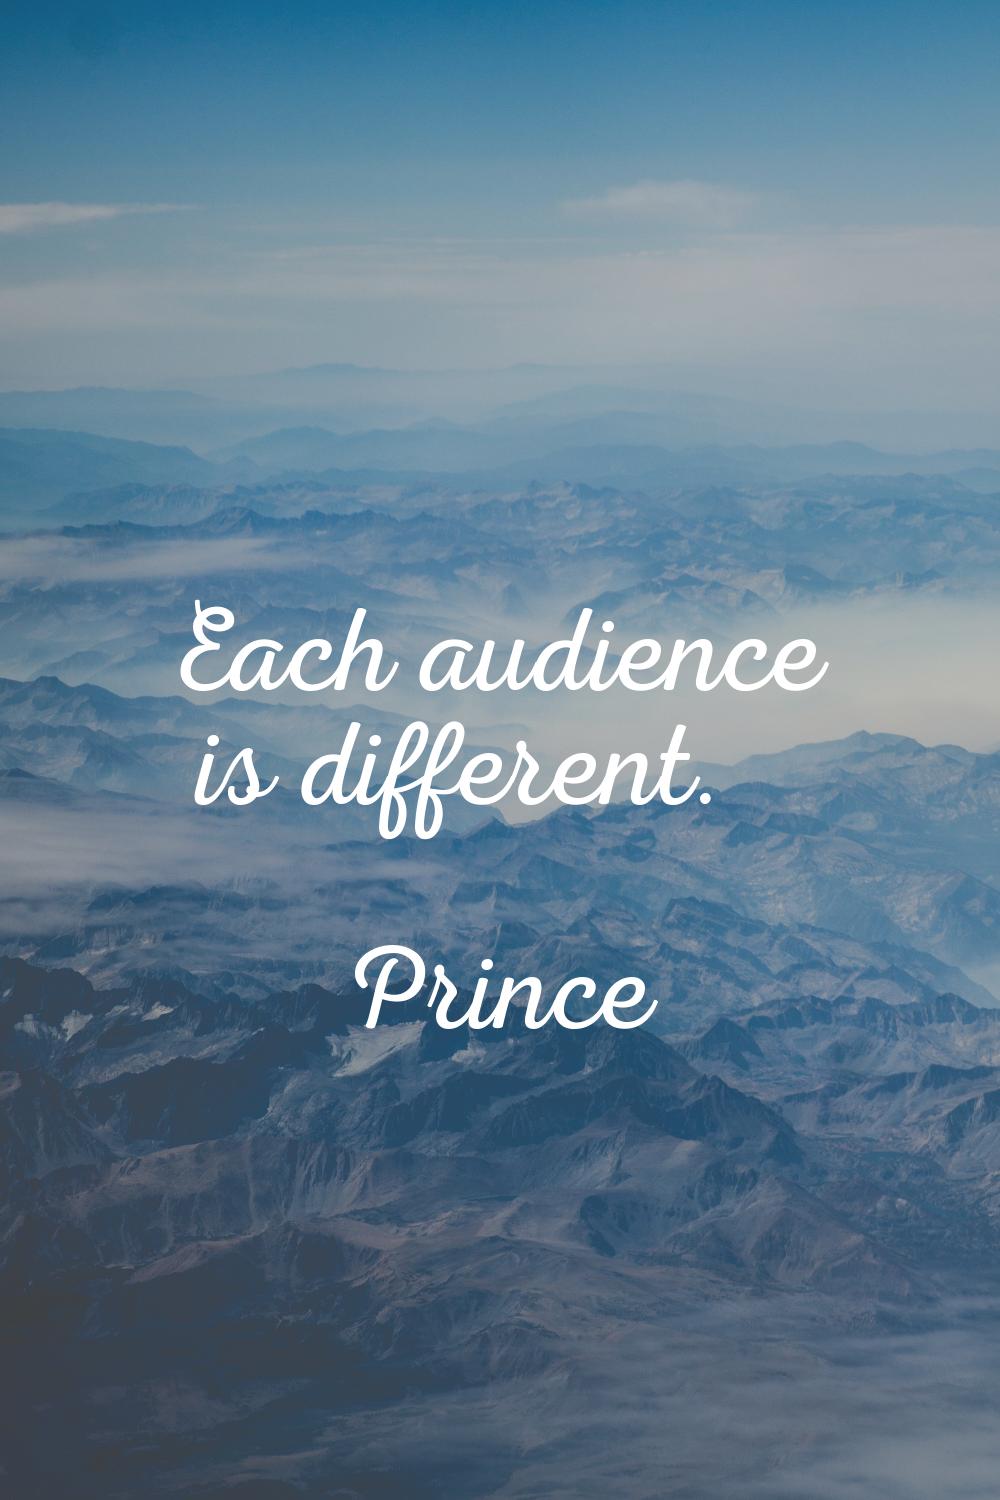 Each audience is different.